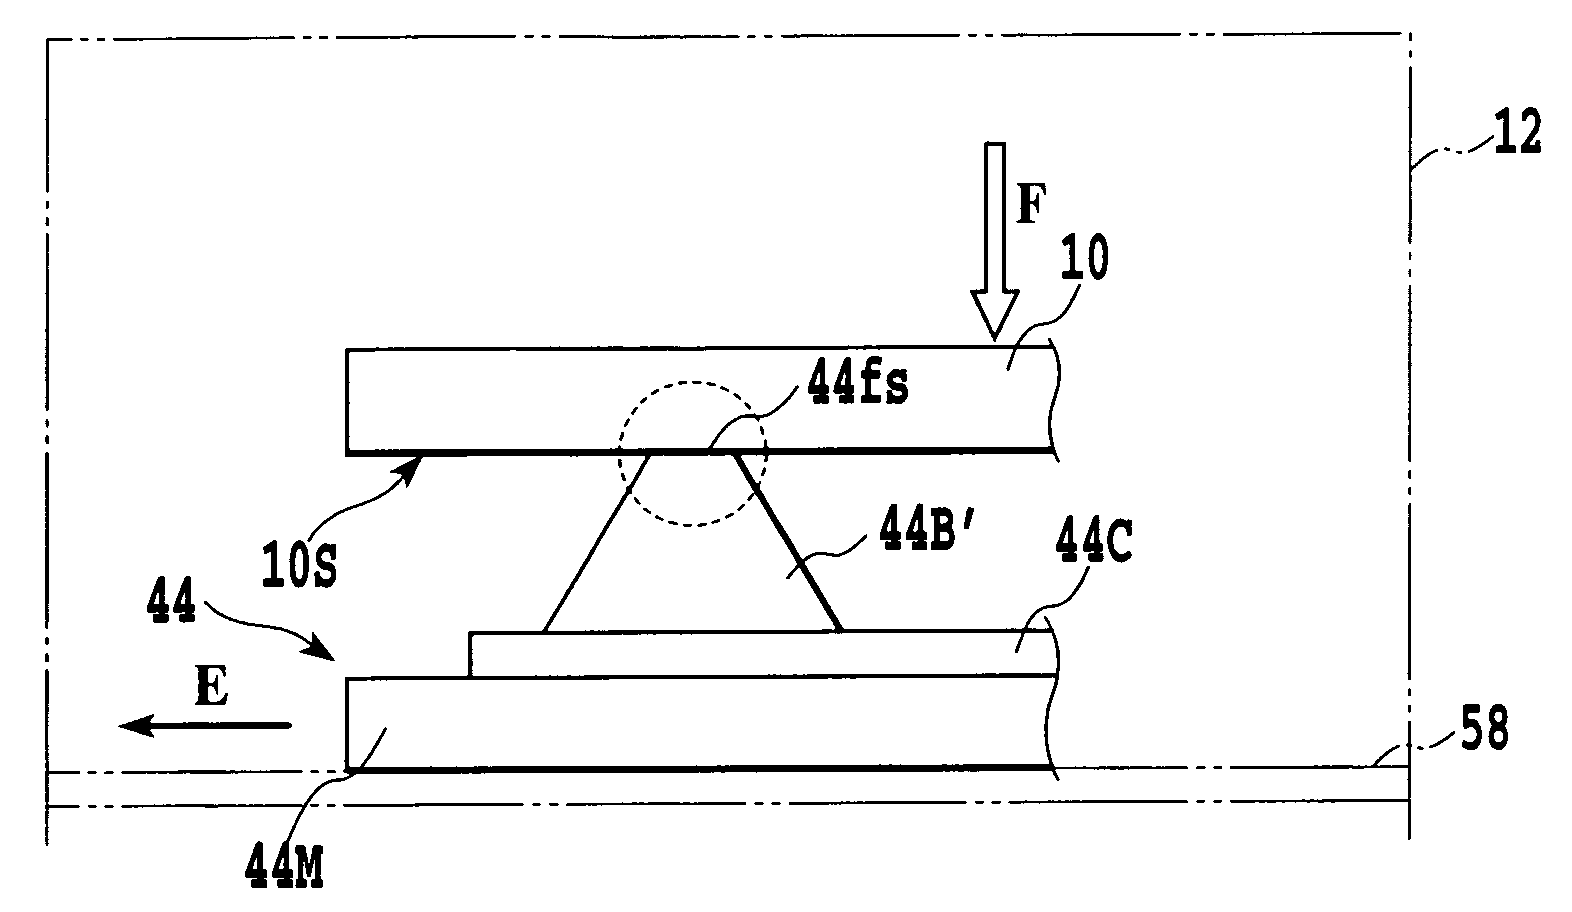 Recovery processing method of an electrode